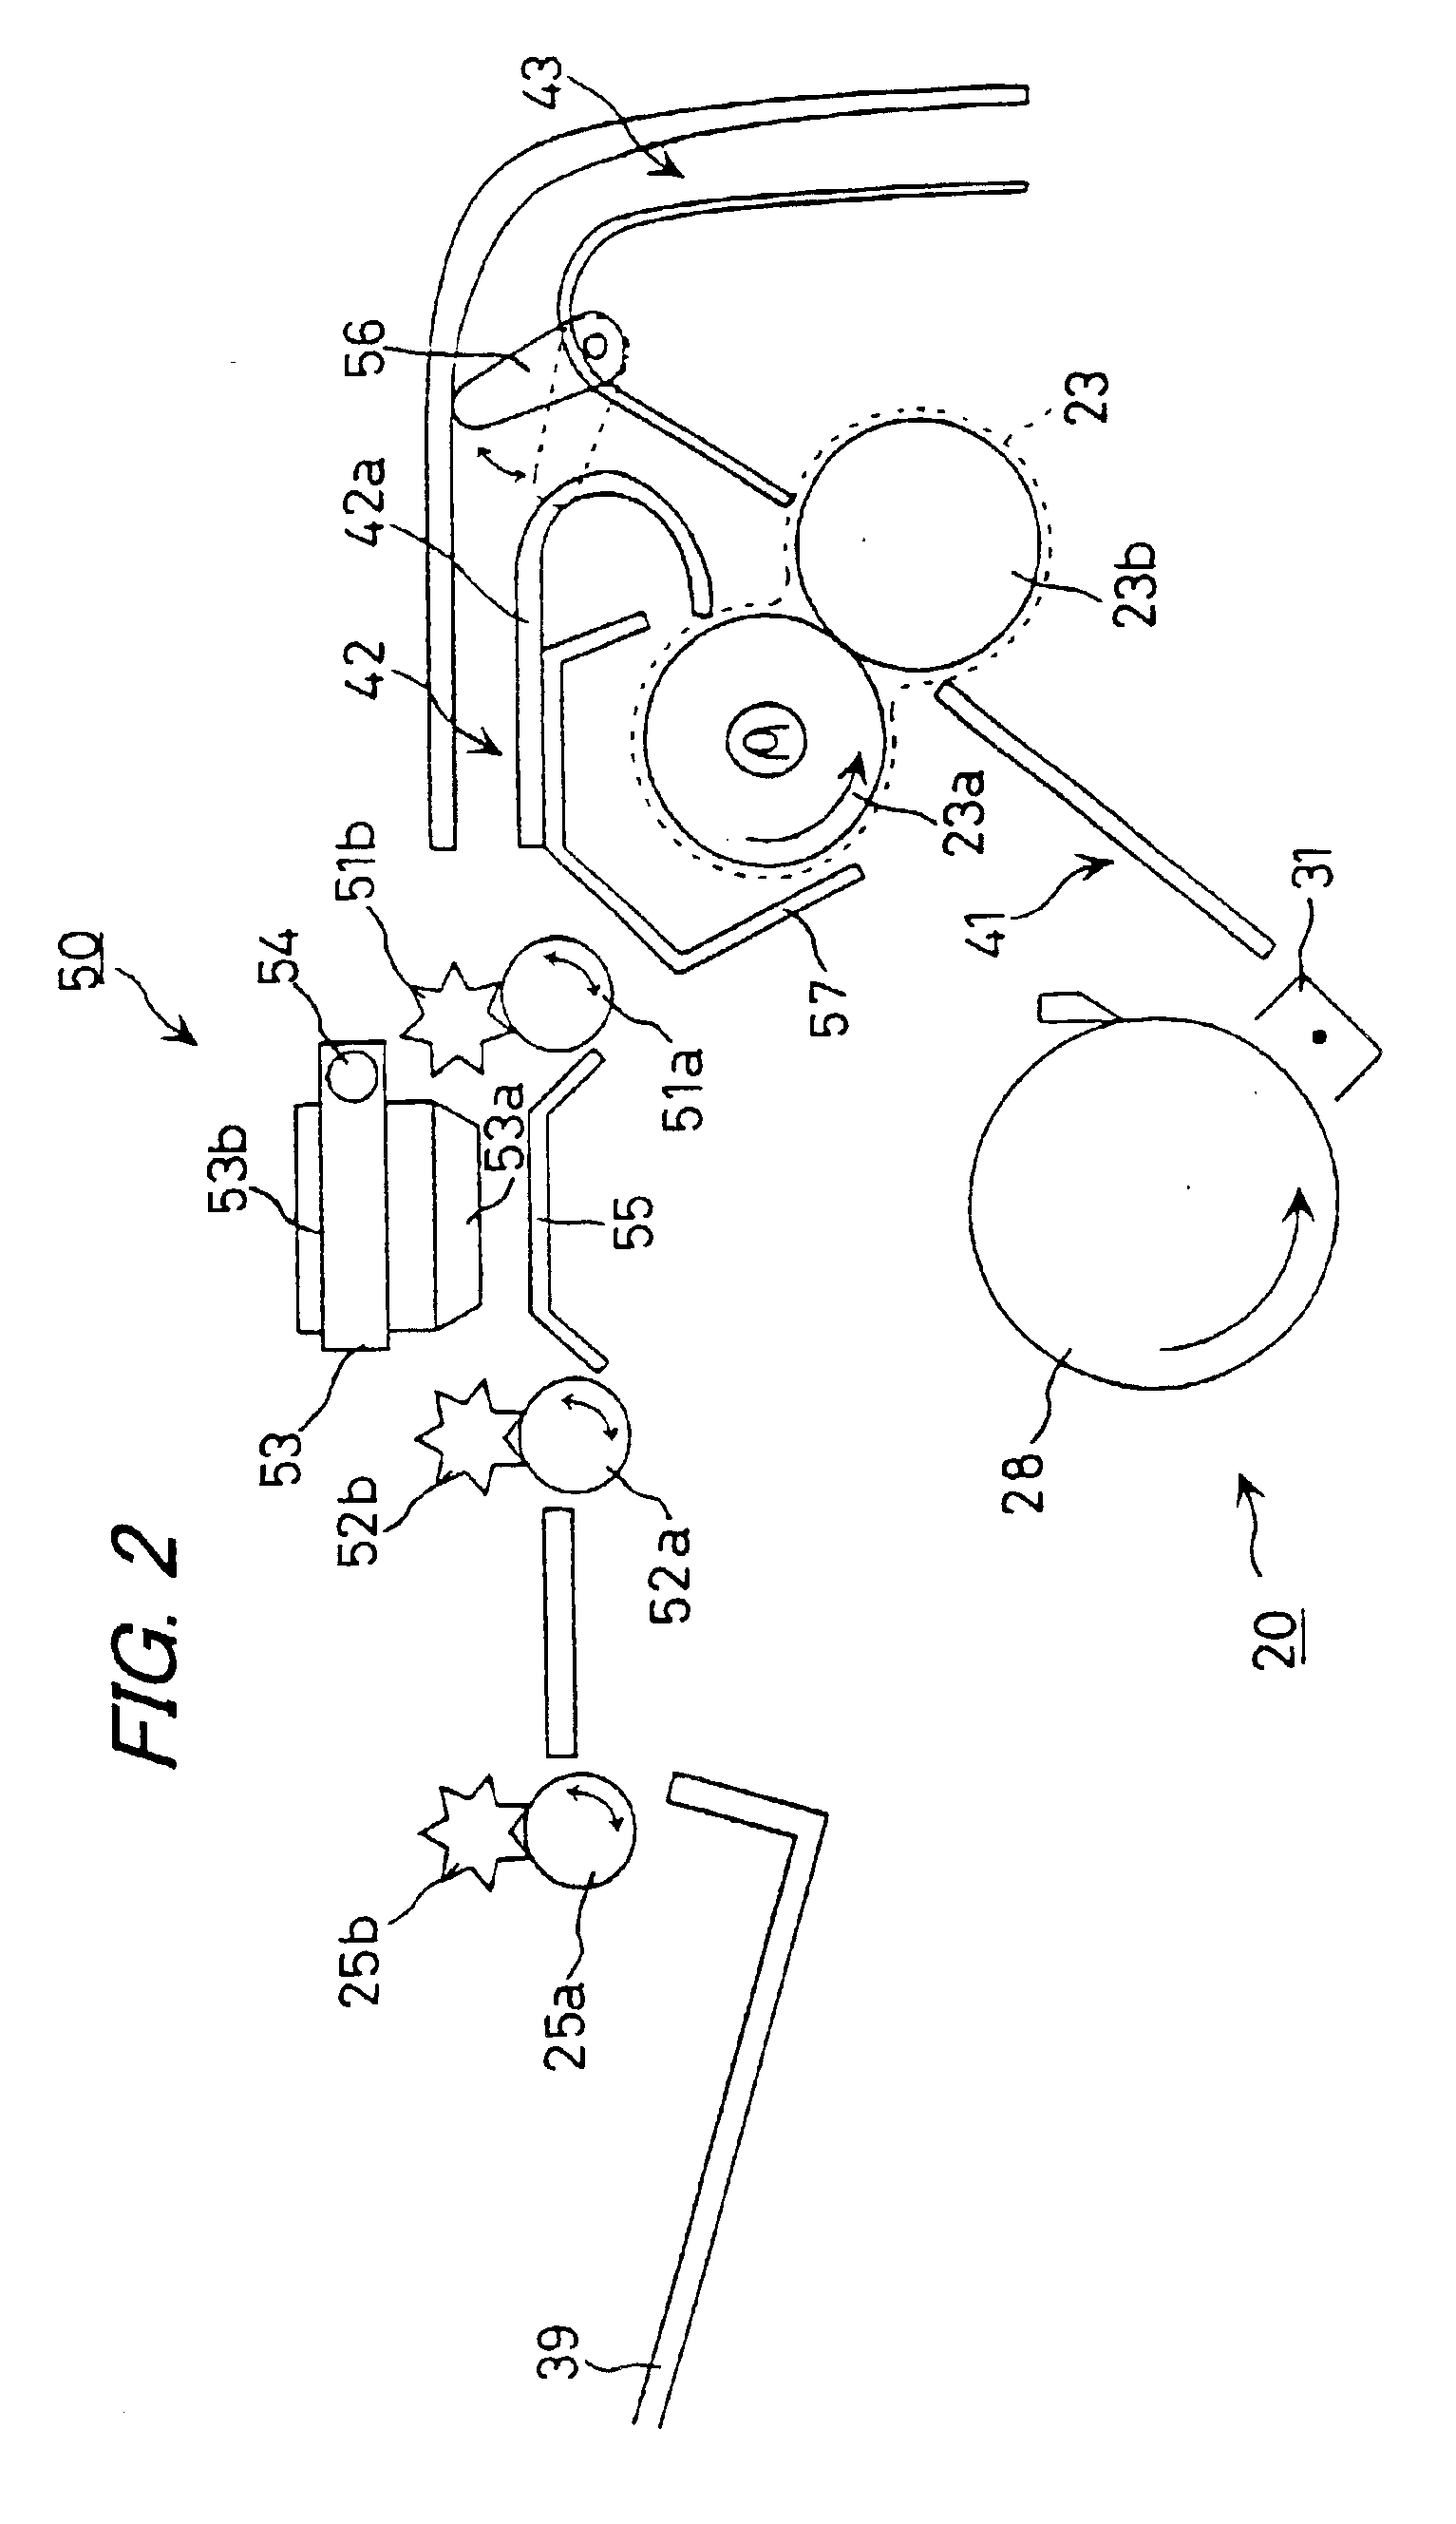 Image forming apparatus for monochromatic and color image formation